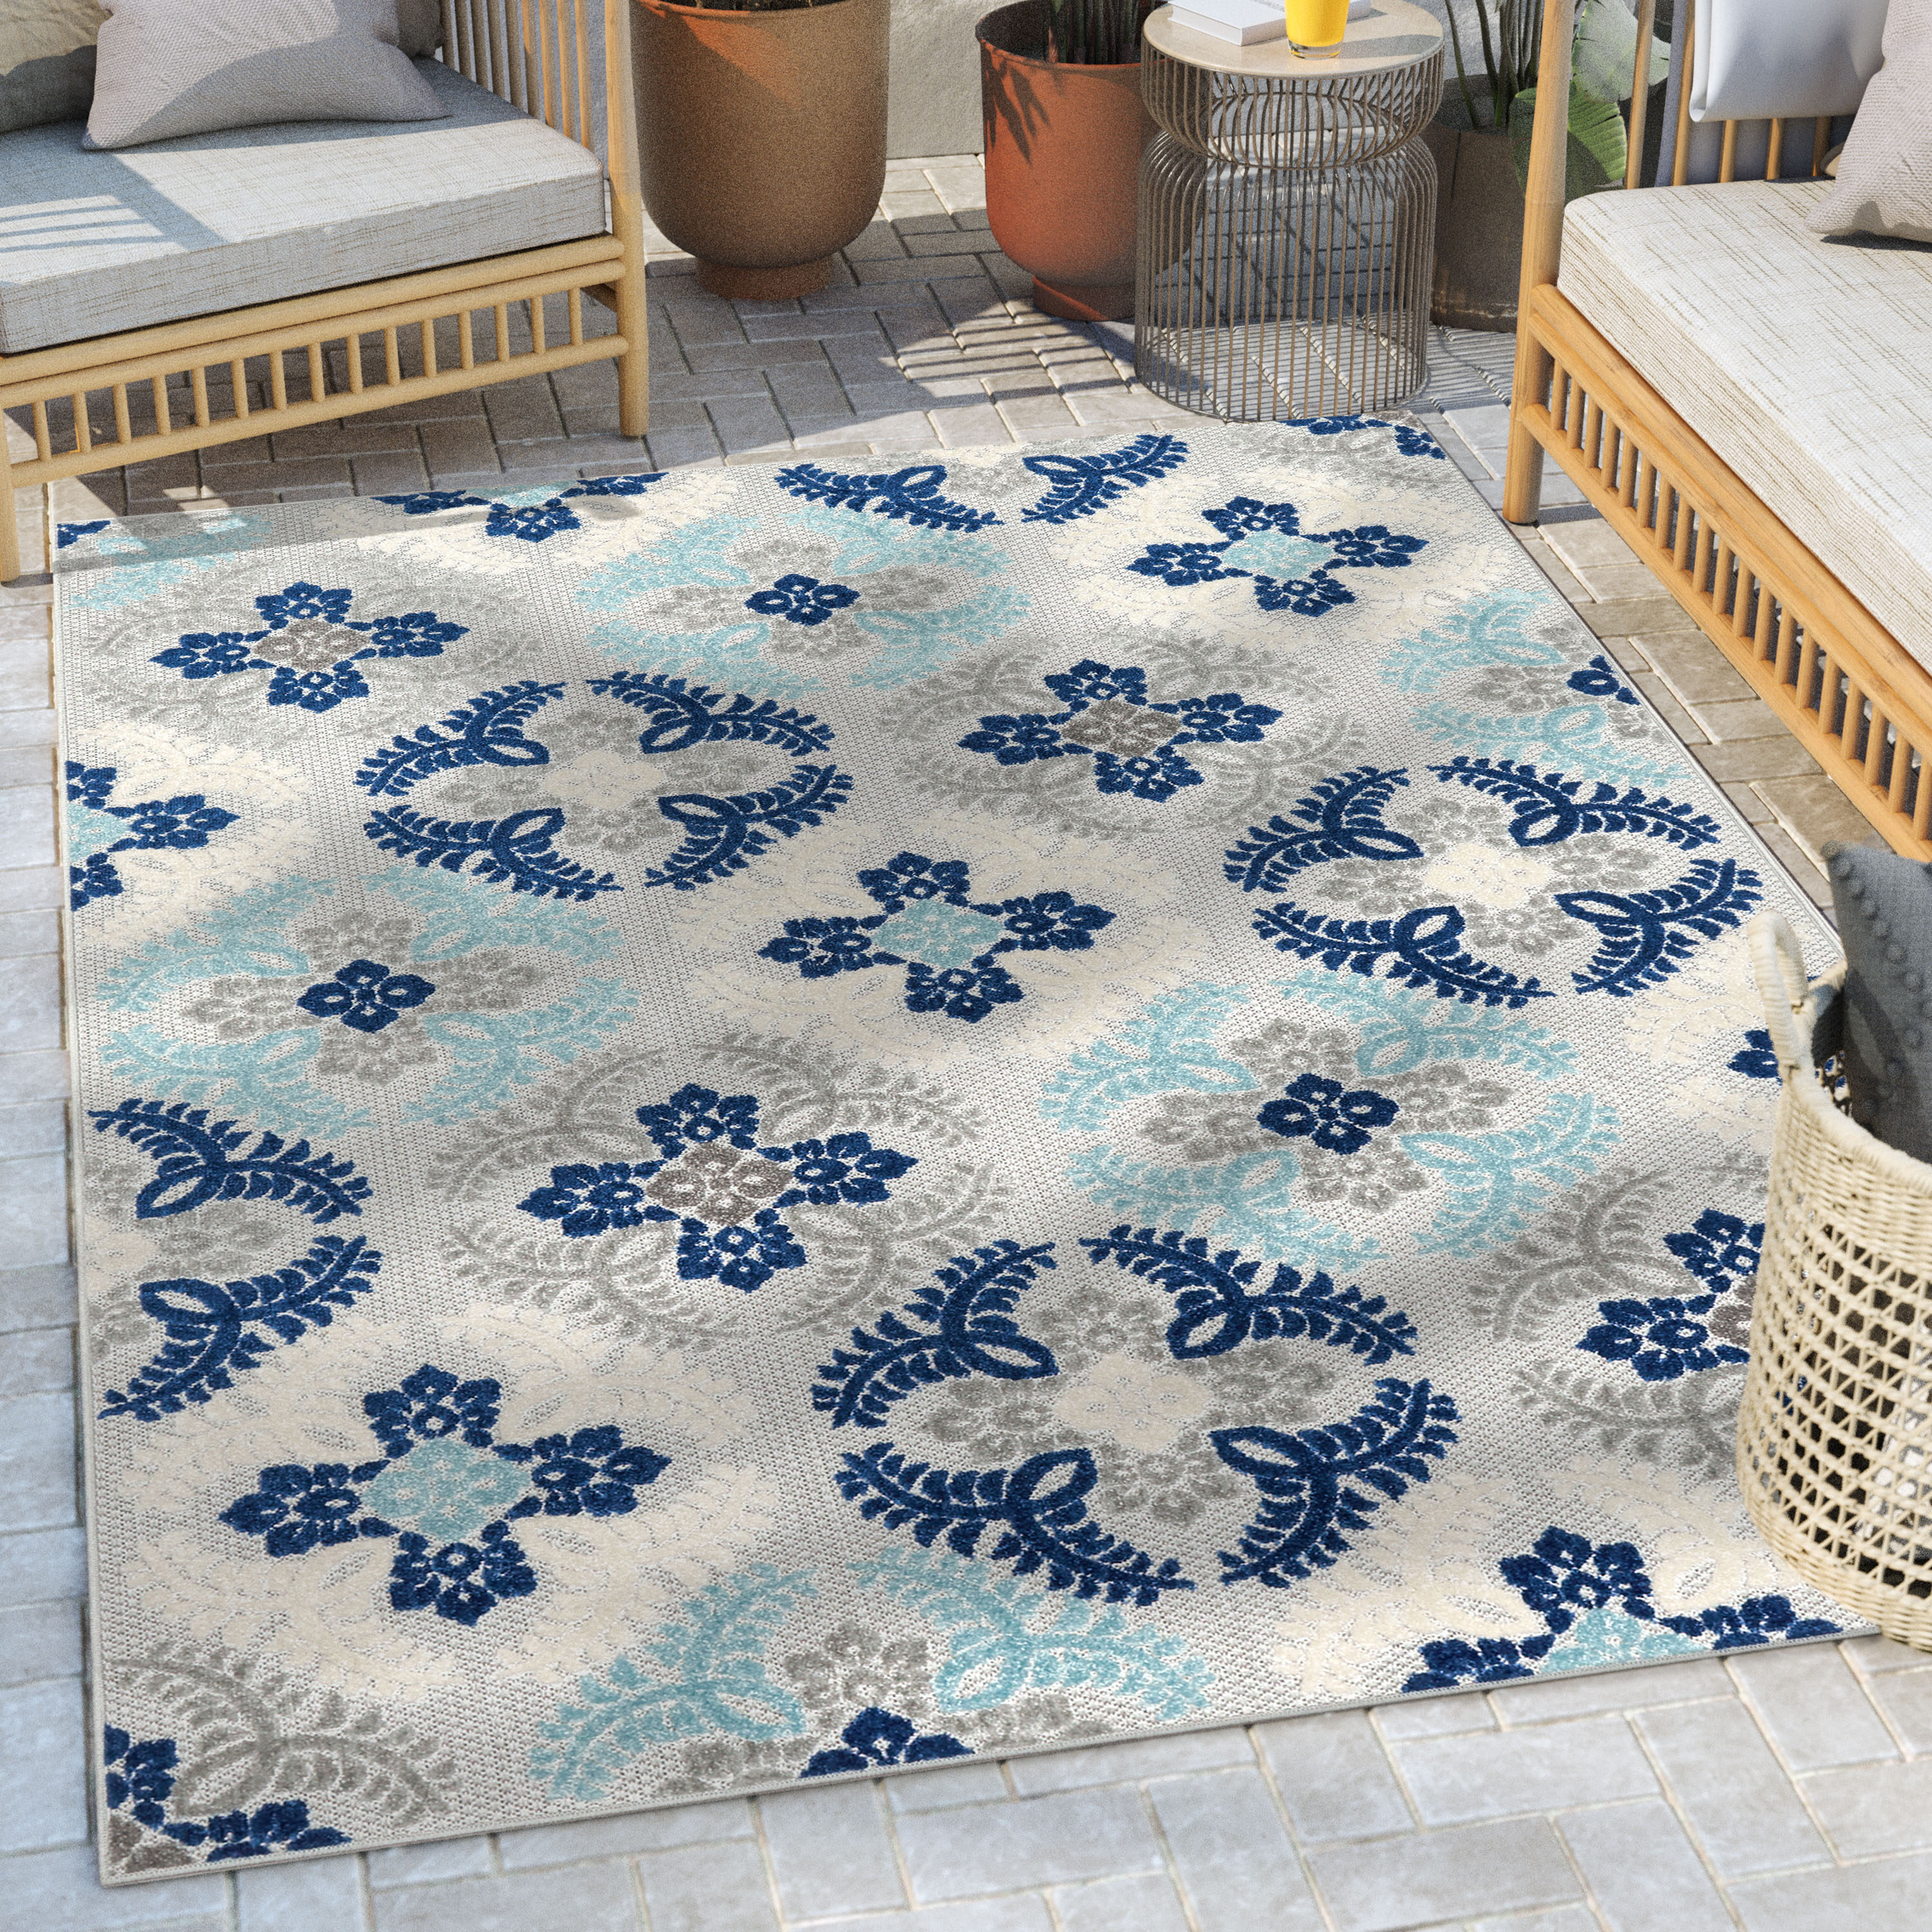 the Blue 5 Modern Mid-century x in Rugs Well department Rug Indoor/Outdoor at Area Frieze Woven 7 Geometric